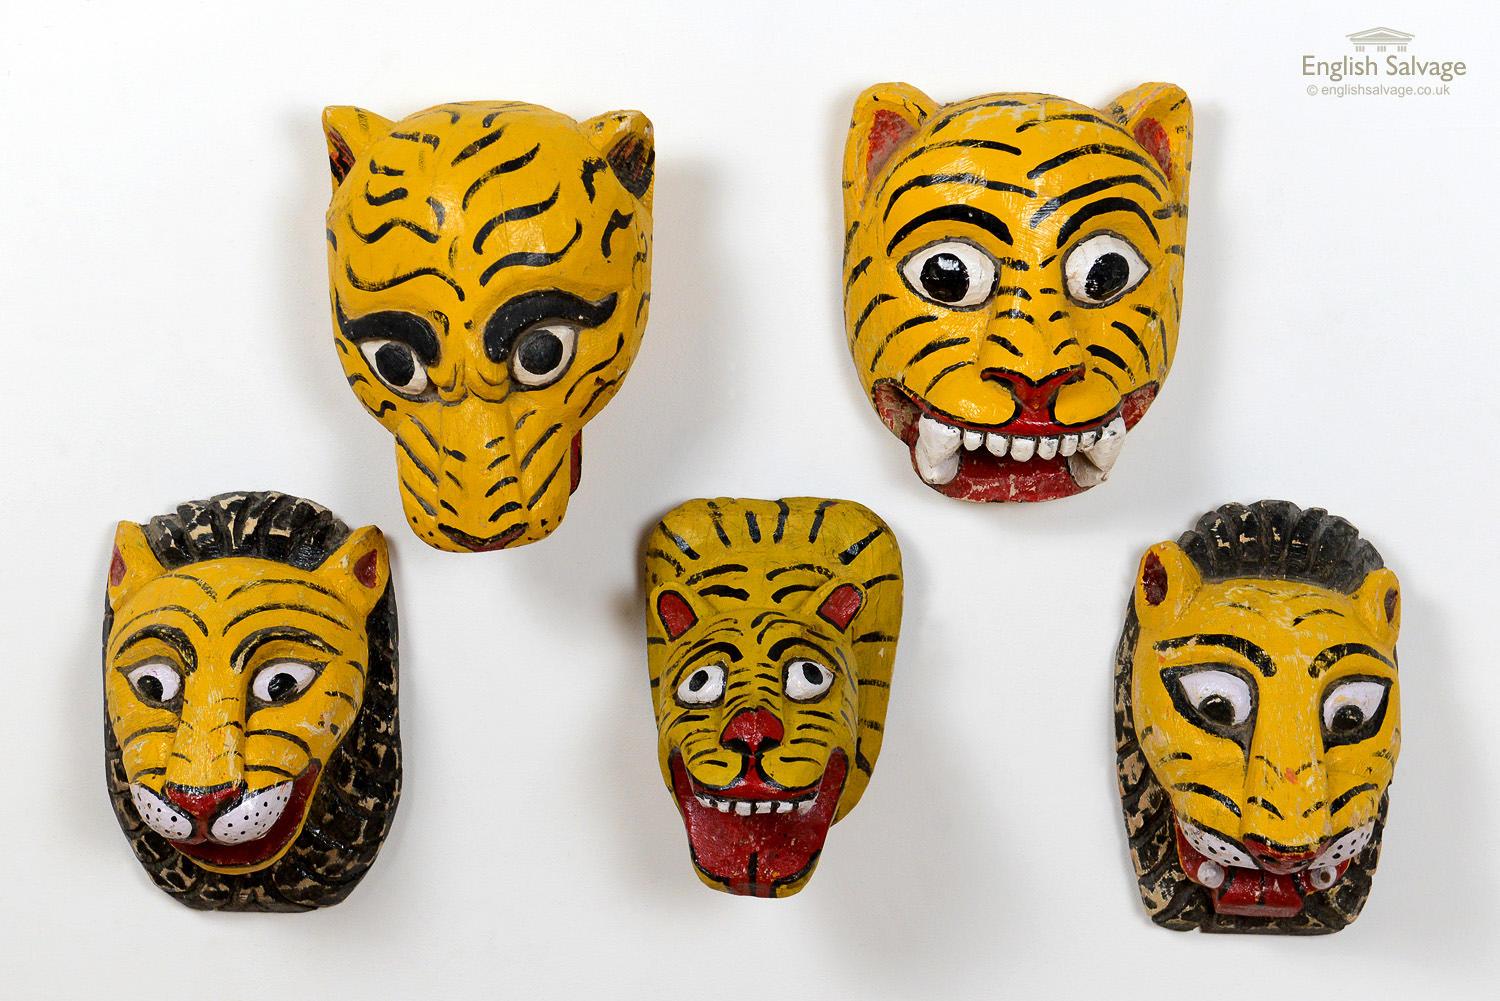 Characterful vintage Indian painted tiger masks which would make great wall displays. The top left tiger is 23cm wide x 32cm high x 18cm deep. The top right tiger is 26cm wide x 33cm high x 19cm high. The bottom two tigers with black manes are each